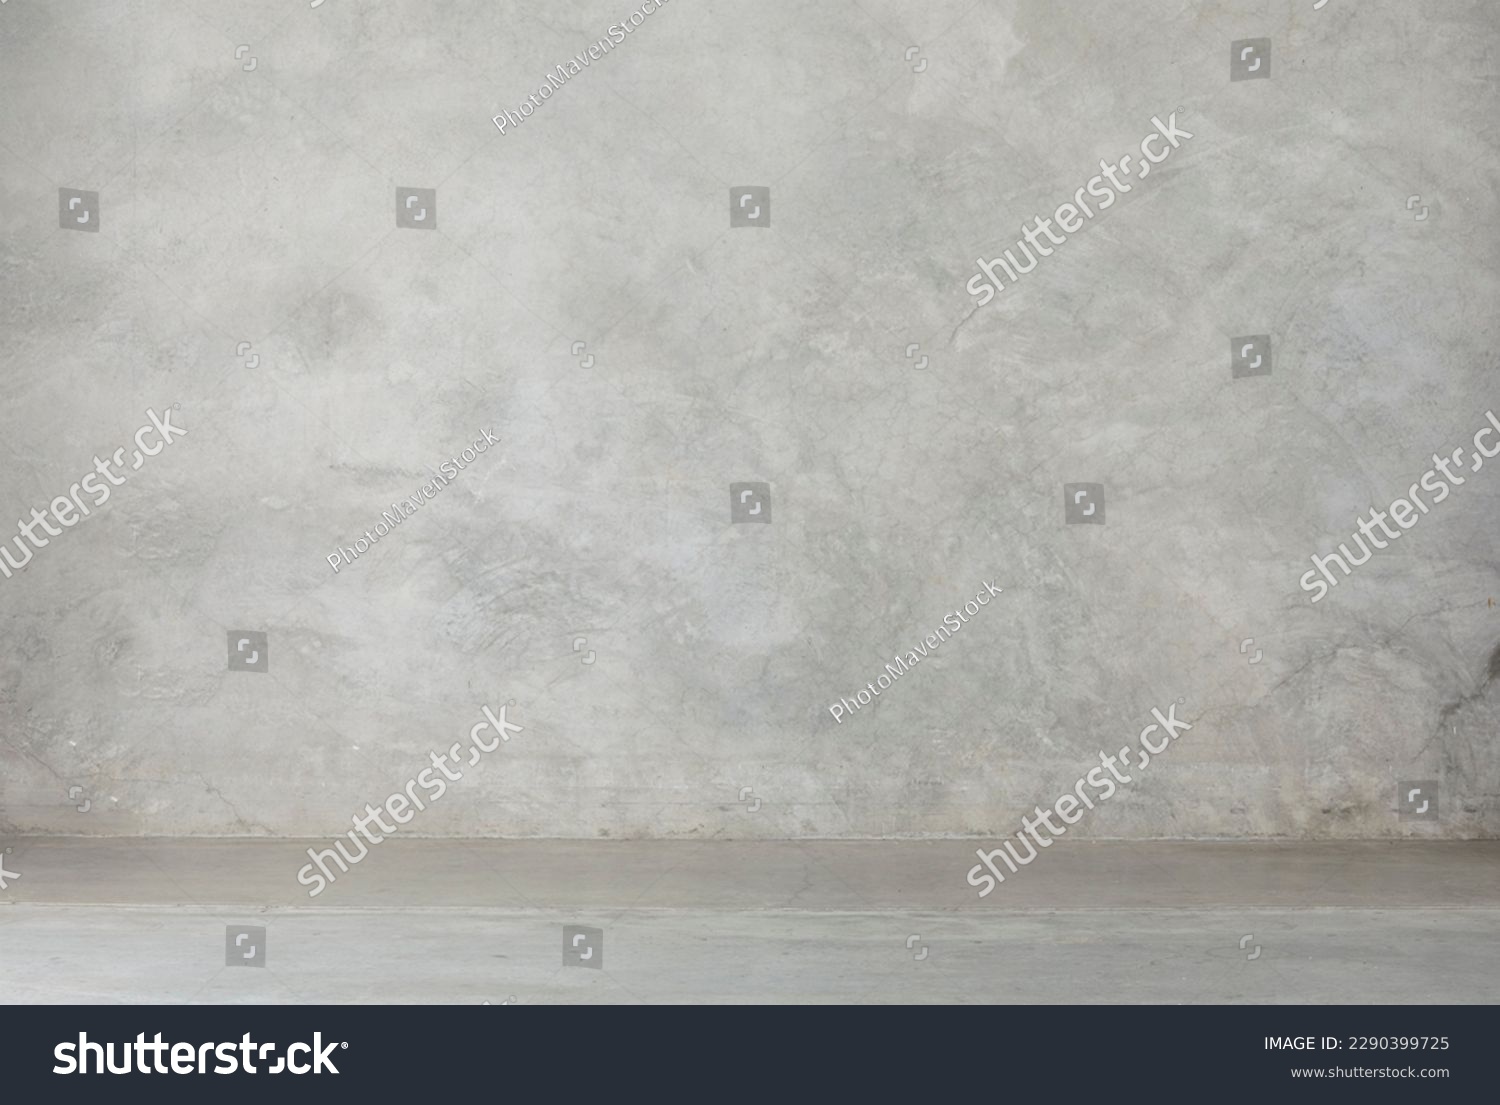 A concrete floor and wall for mock ups and artwork. #2290399725